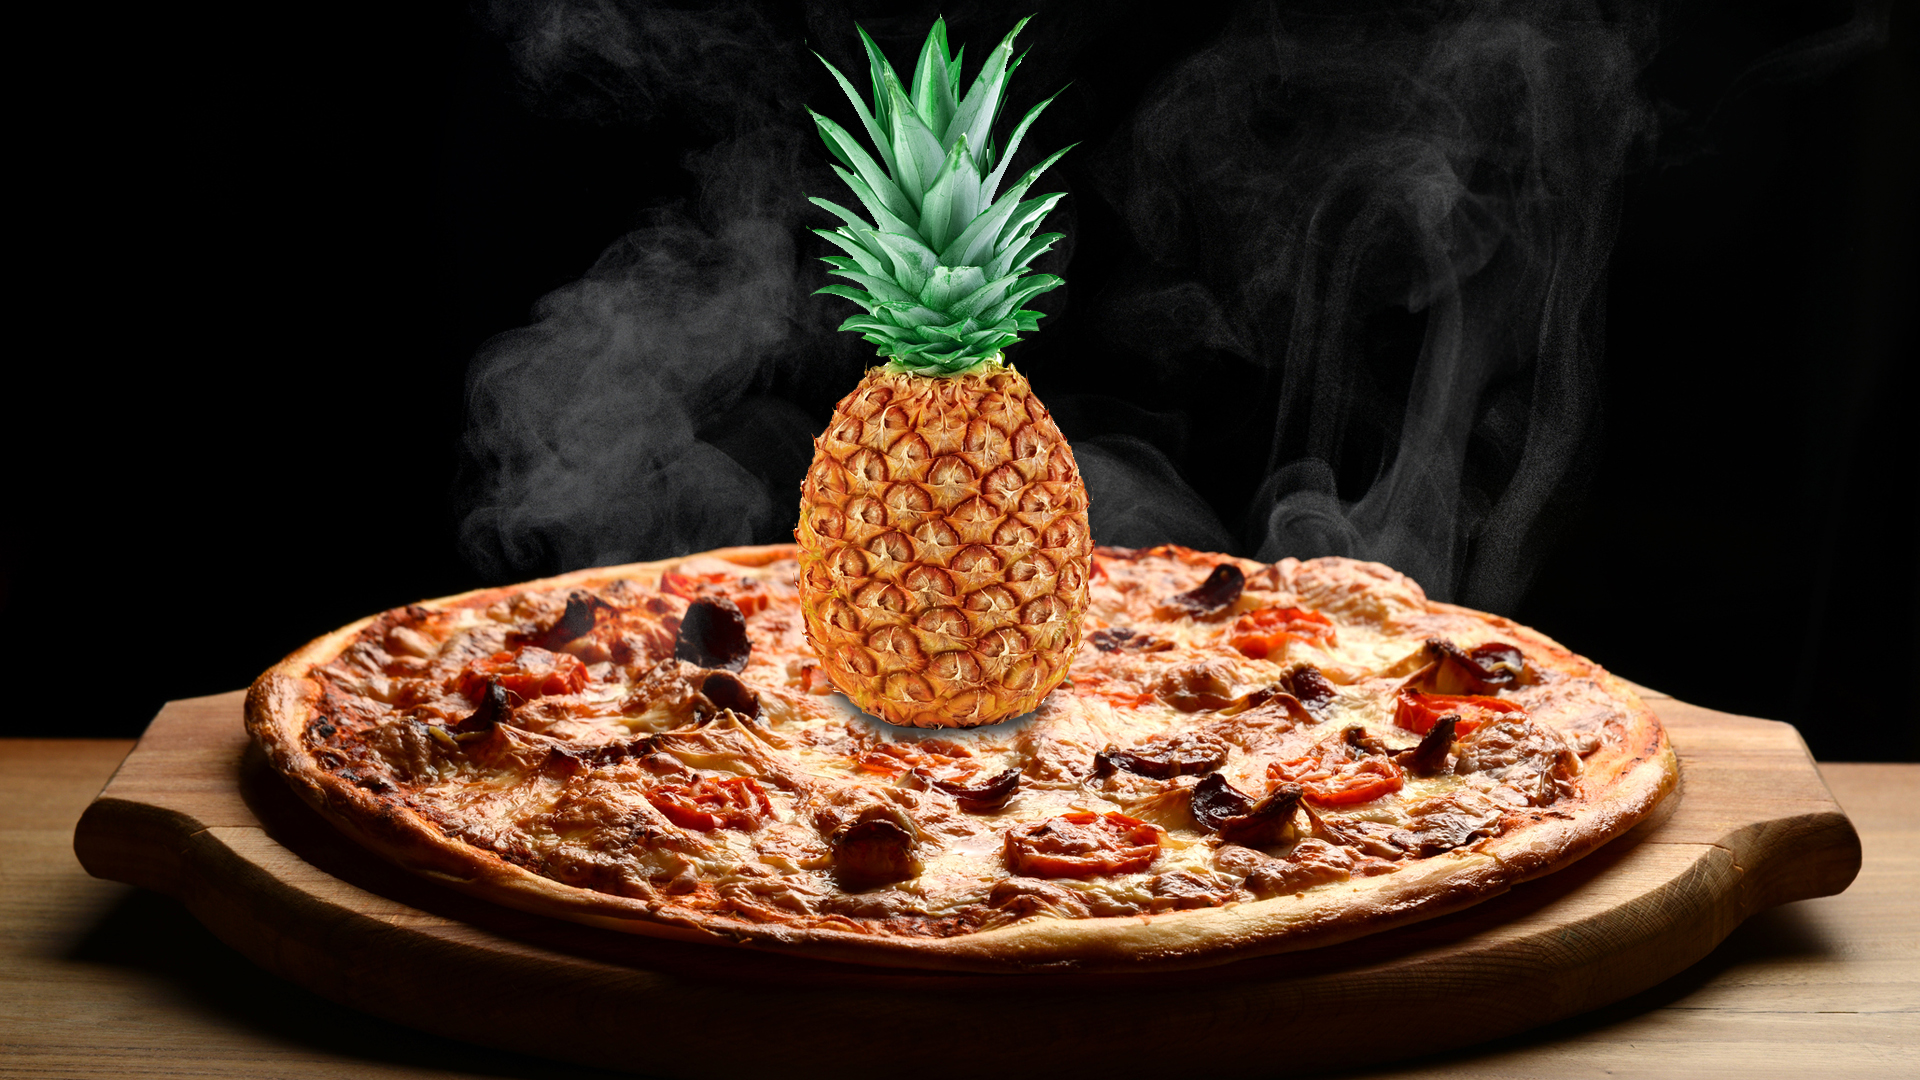 A whole pineapple sitting on a hot pizza